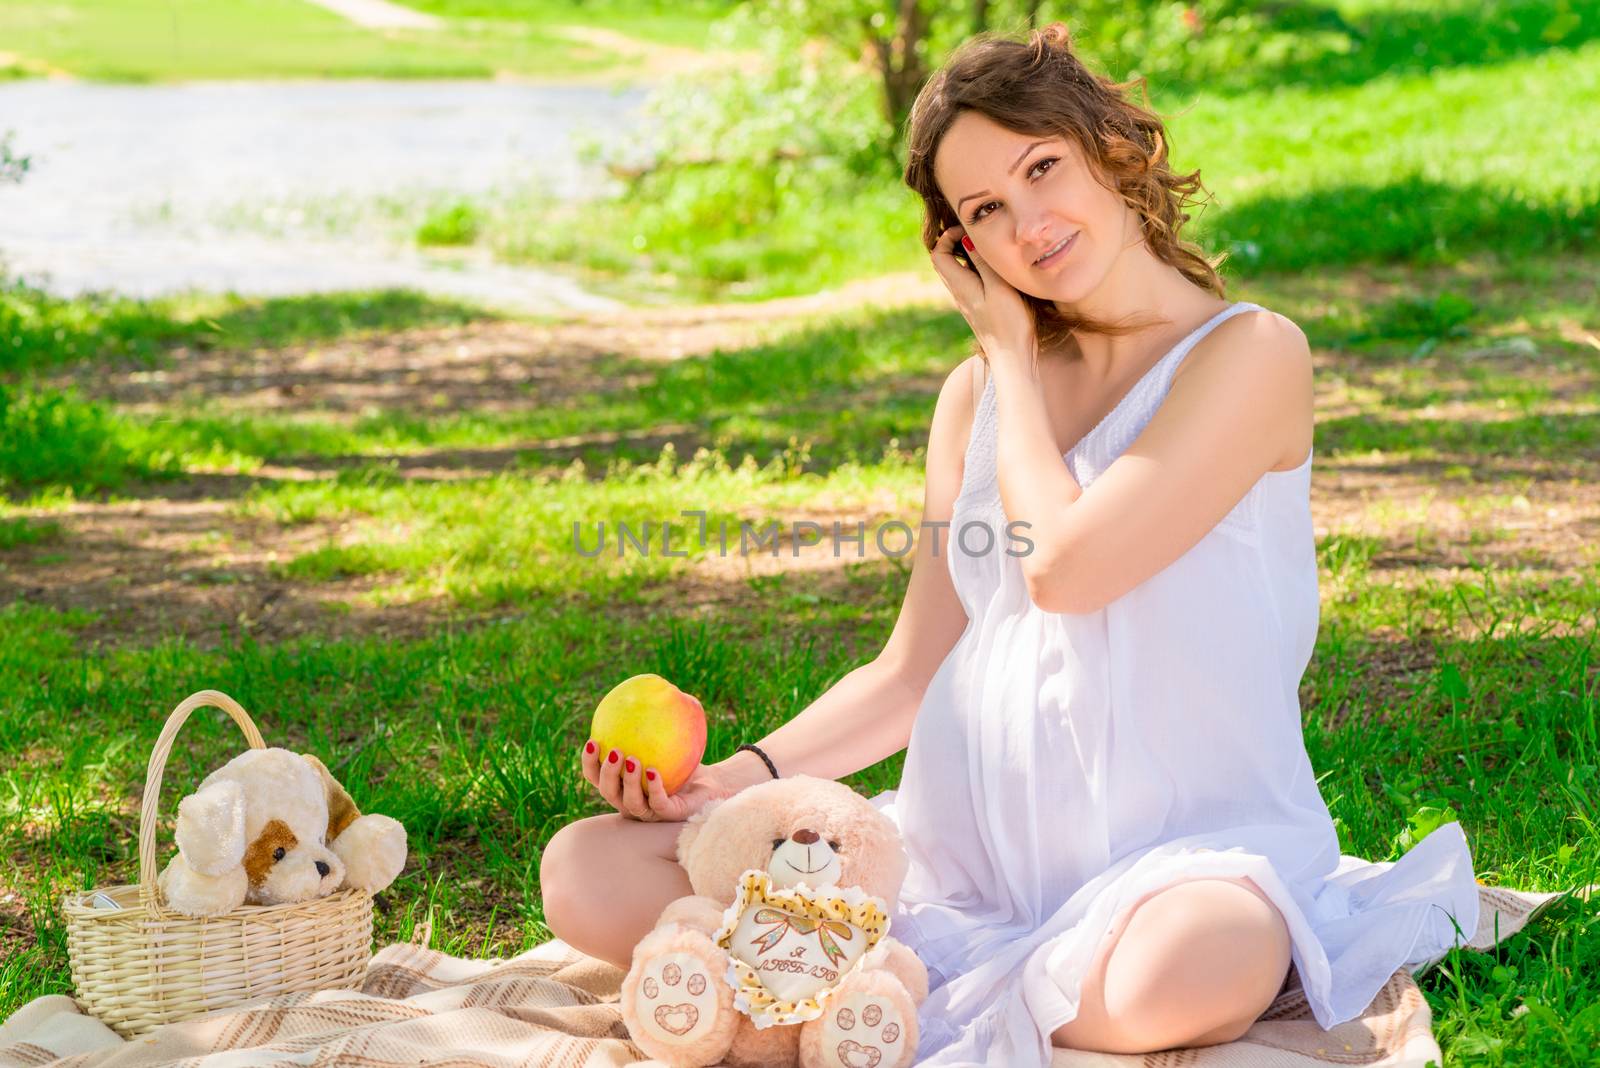 Young pregnant girl in a white sarafan on a plaid in a park at a by kosmsos111